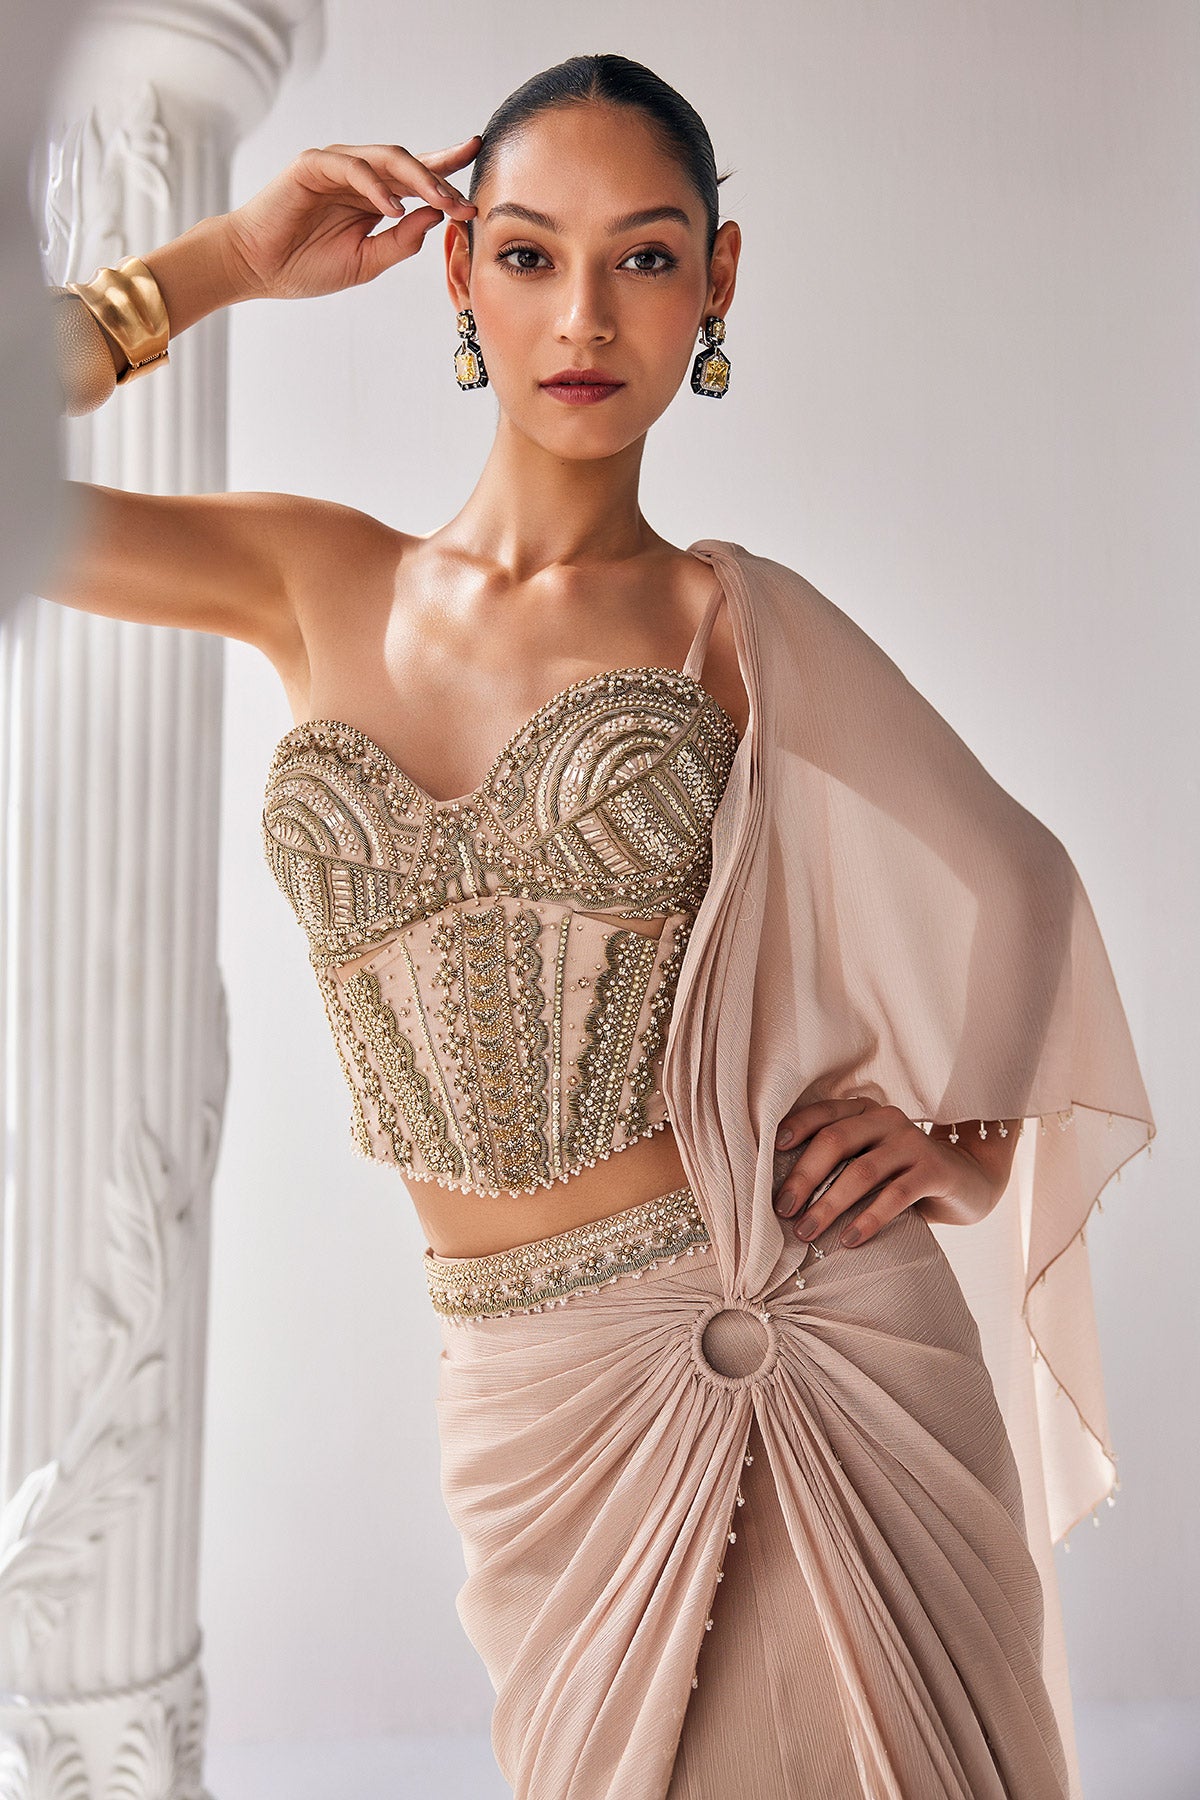 Draped Saree In Metallic Shimmer Chiffon Fabric With Intricate Embroidery Detail In The Corset Along With An Embroiderd Belt.